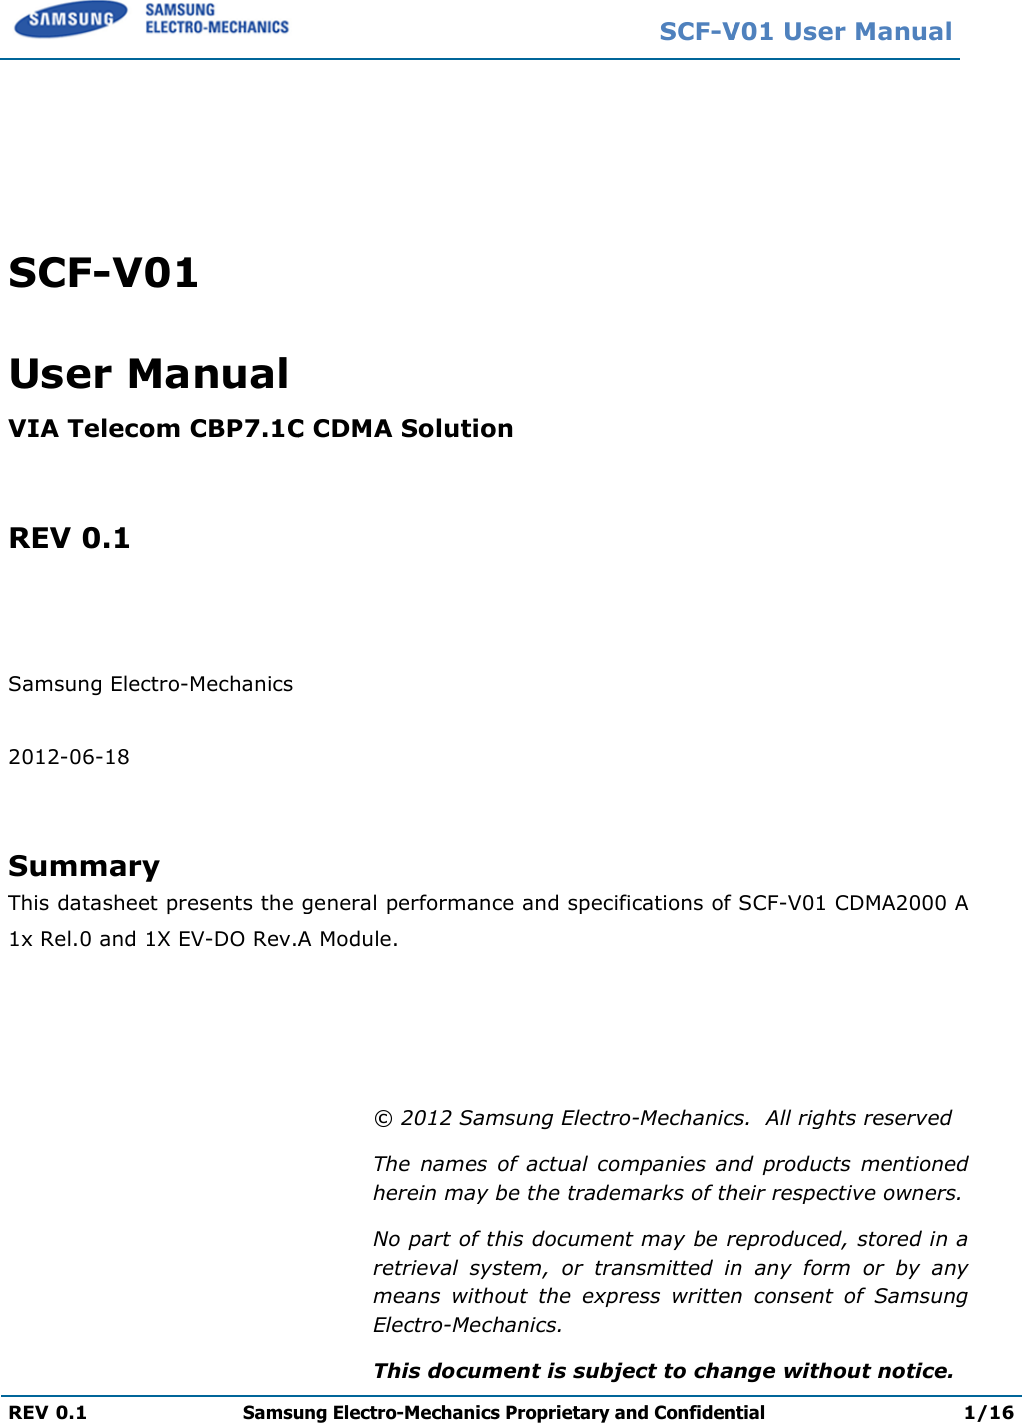   REV 0.1 Samsung Electro    SCF-V01 User Manual VIA Telecom CBP7.1C CDMA  REV 0.1    Samsung Electro-Mechanics  2012-06-18   Summary This datasheet presents the 1x Rel.0 and 1X EV-DO Rev.A     SCF-V01 Samsung Electro-Mechanics Proprietary and Confidential 1C CDMA Solution  the general performance and specifications of A Module. © 2012 Samsung Electro-Mechanics.  All rights reservedThe  names  of  actual  companies  and  products  mentioned herein may be the trademarks of their respective owners.No part of this document may be reproduced, stored in a retrieval  system,  or  transmitted  in  any  formmeans  without  the  express  written  consent  of  Samsung Electro-Mechanics. This document is subject to change without noticeV01 User Manual Proprietary and Confidential 1/16 general performance and specifications of SCF-V01 CDMA2000 A Mechanics.  All rights reserved The  names  of  actual companies  and  products  mentioned herein may be the trademarks of their respective owners. be reproduced, stored in a retrieval  system,  or  transmitted  in  any  form  or  by  any means  without  the  express  written  consent  of  Samsung change without notice. 